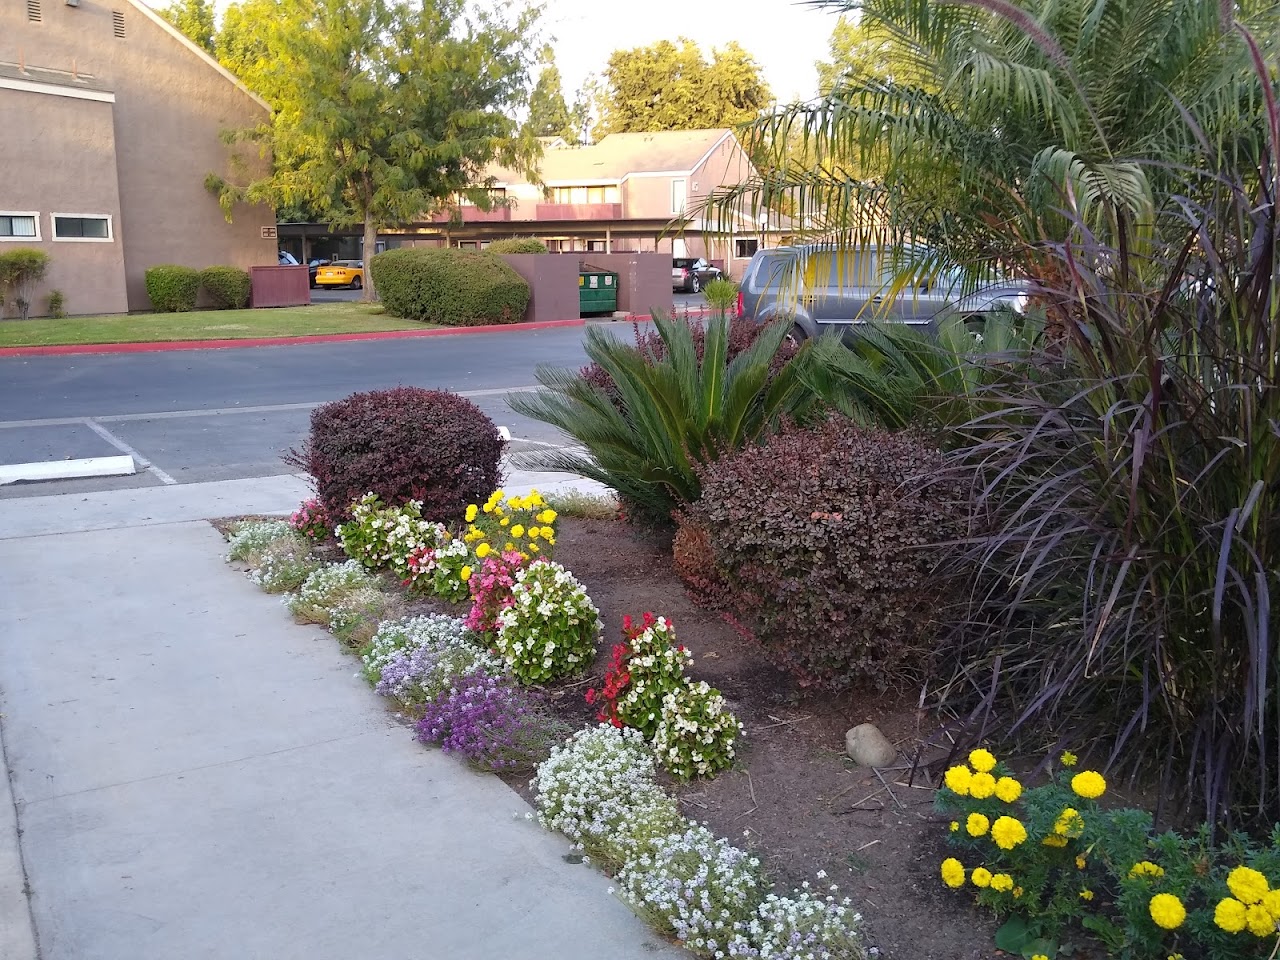 Photo of SHADOWBROOK APTS. Affordable housing located at 1839 NELSON BLVD SELMA, CA 93662